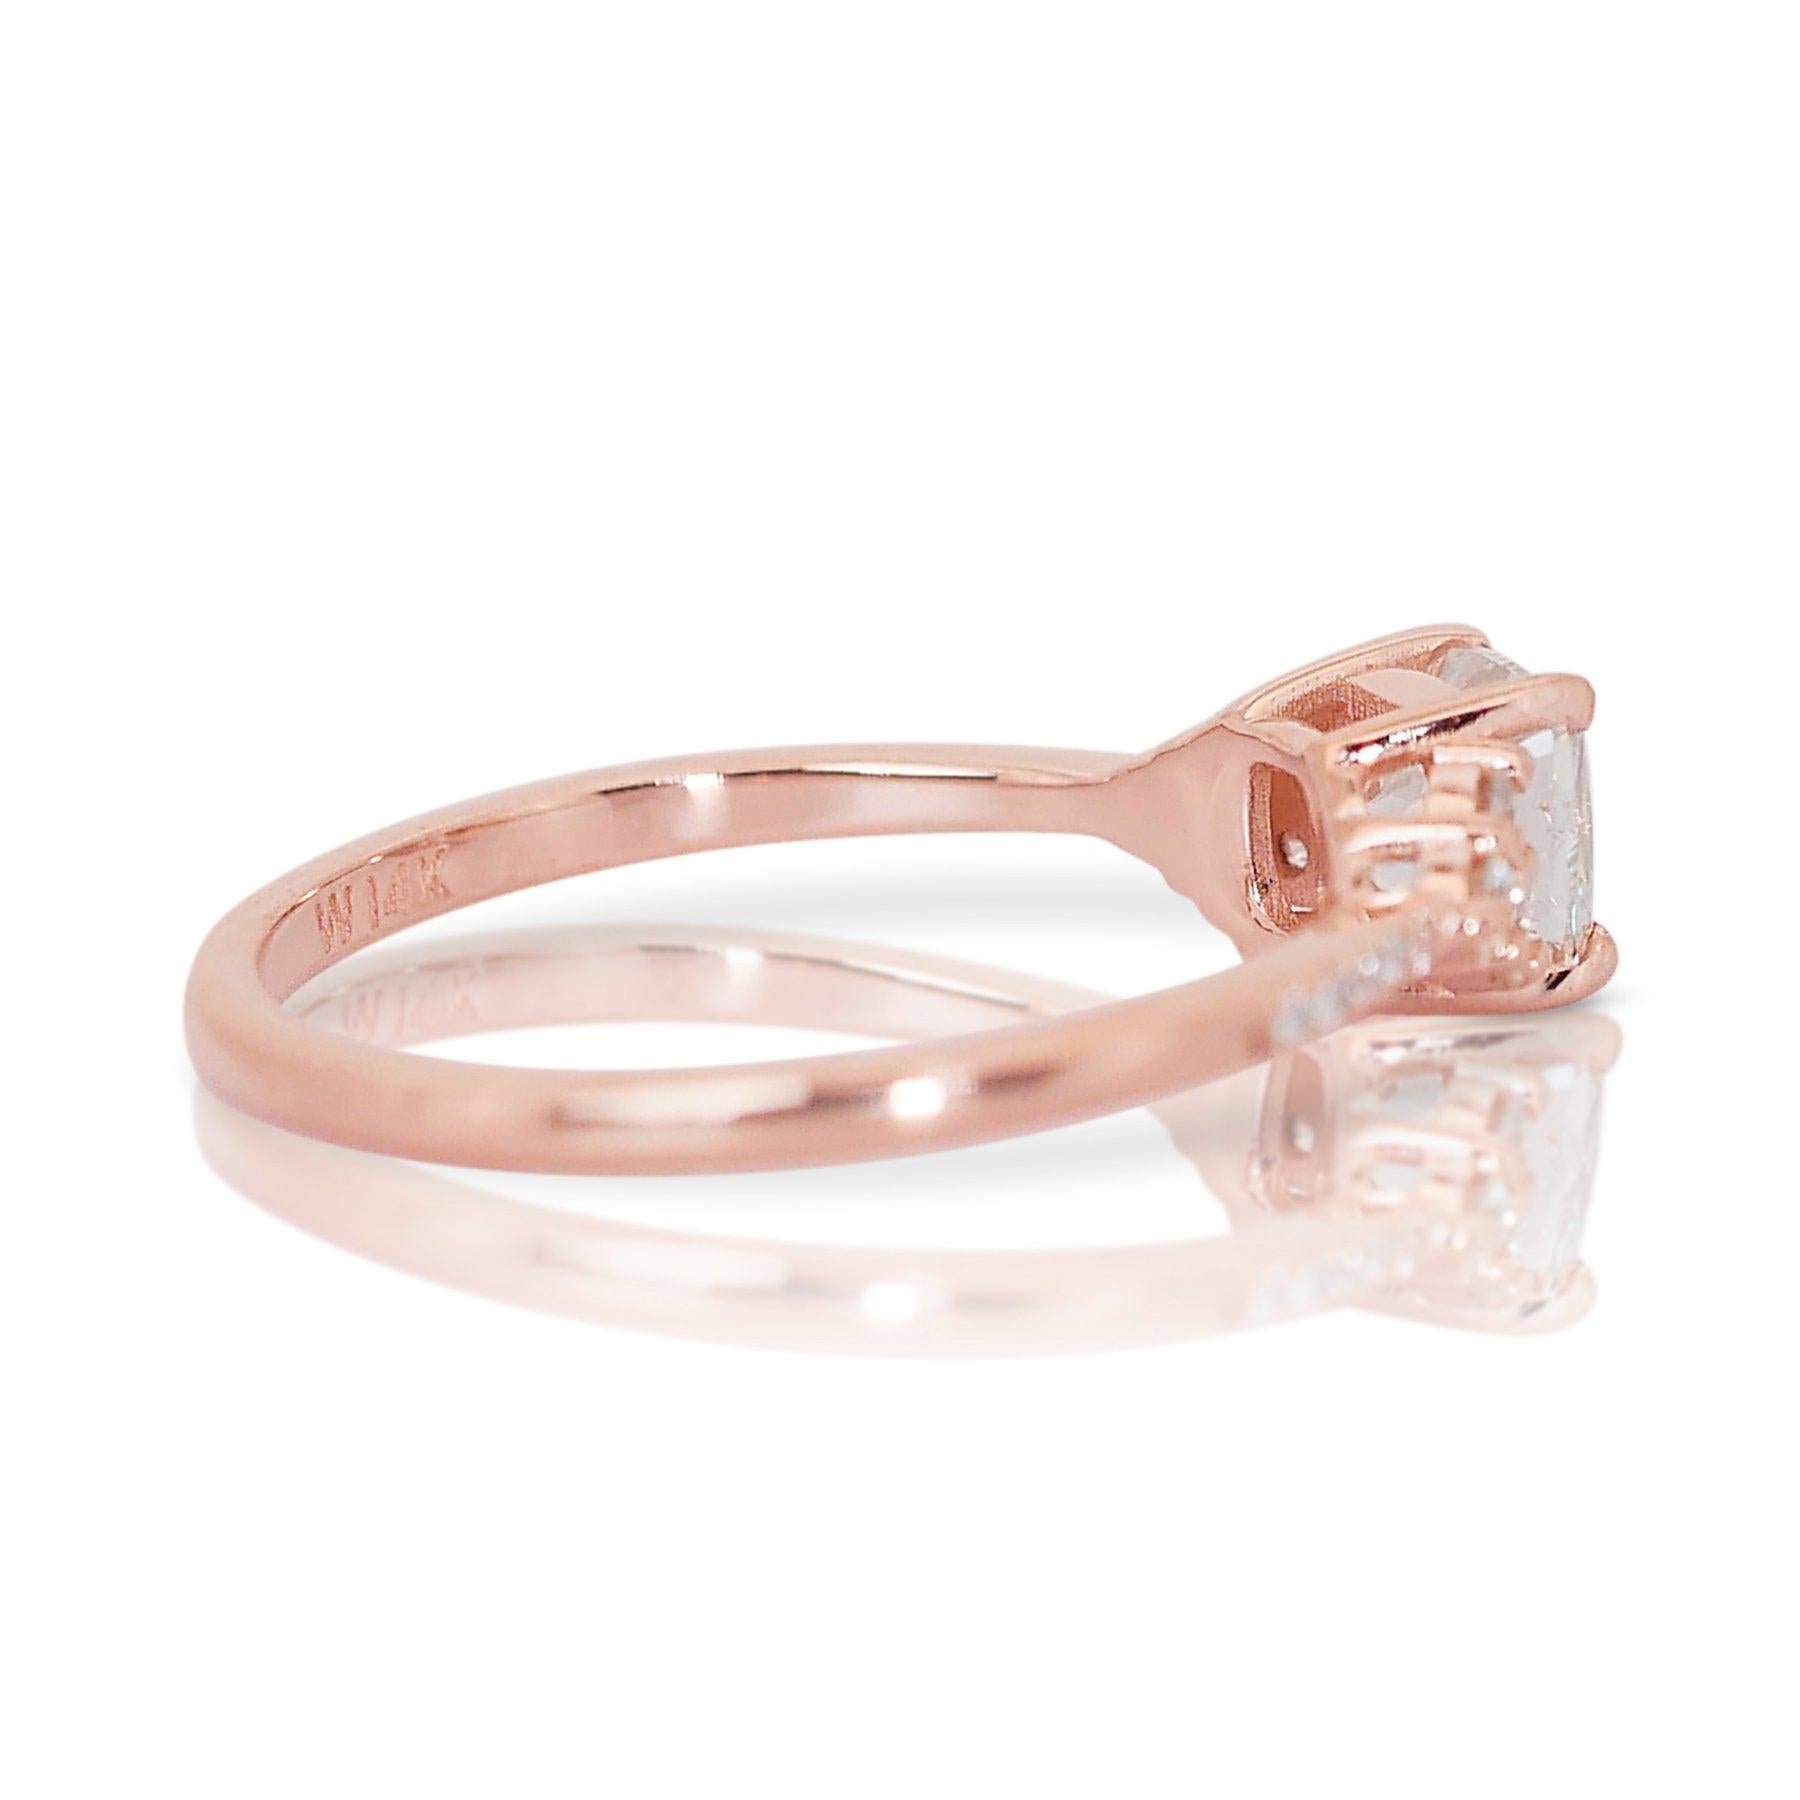 Sophisticated 1.65ct Diamonds Pave Ring in 14k Rose Gold - GIA Certified In New Condition For Sale In רמת גן, IL